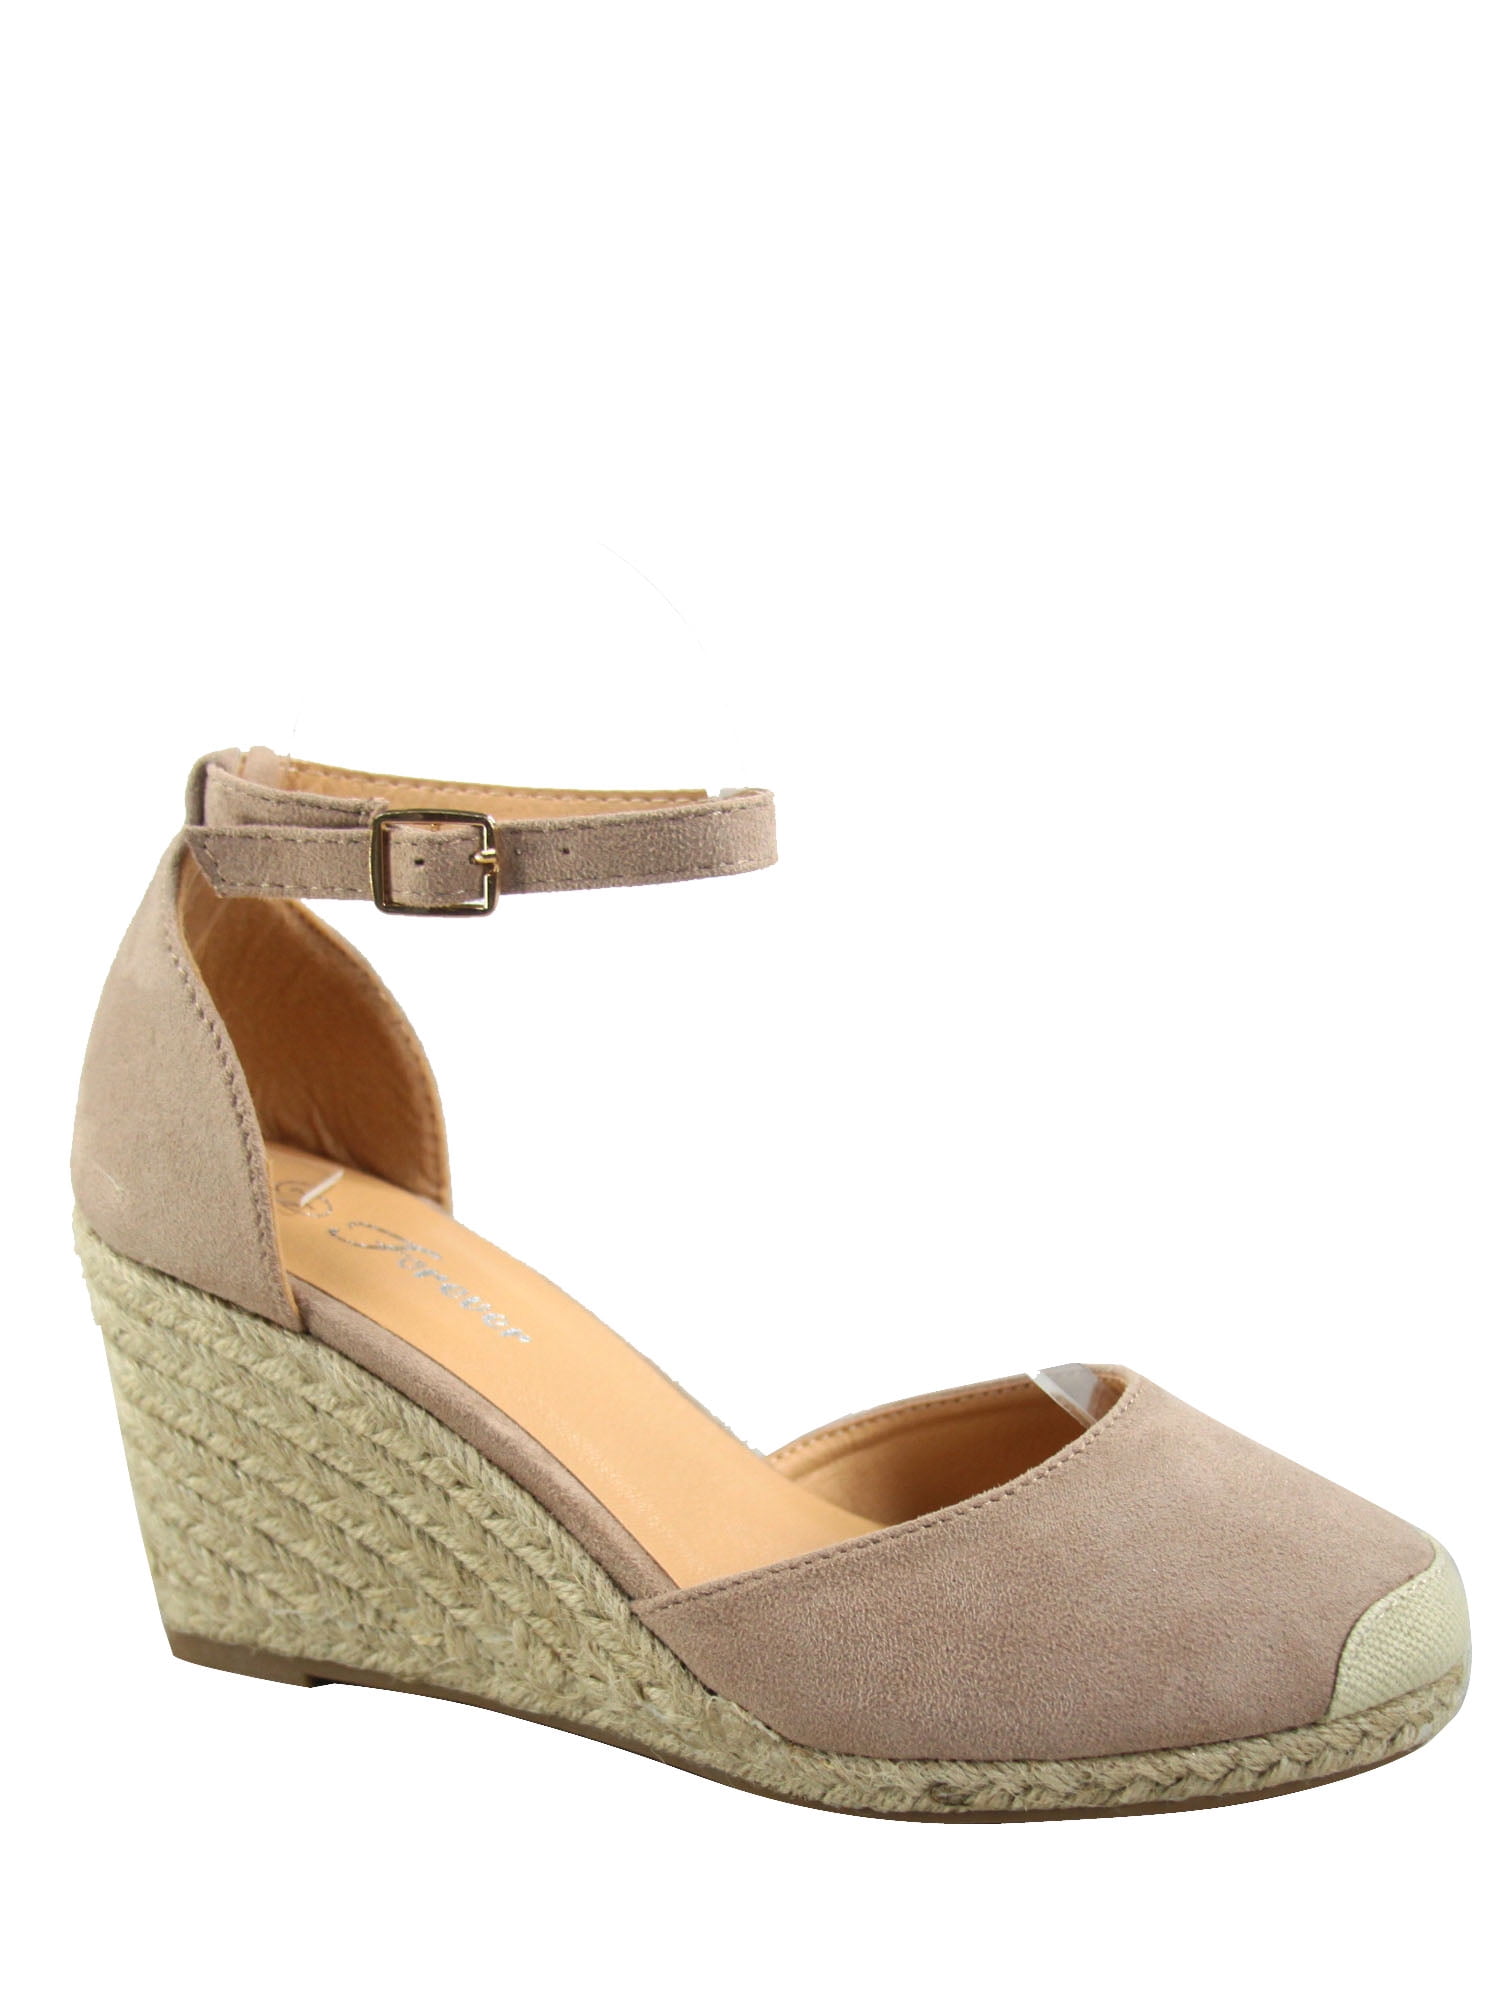 Palin-14 Women's Closed Round Toe Ankle Strap Espadrille Wedge Sandals ...